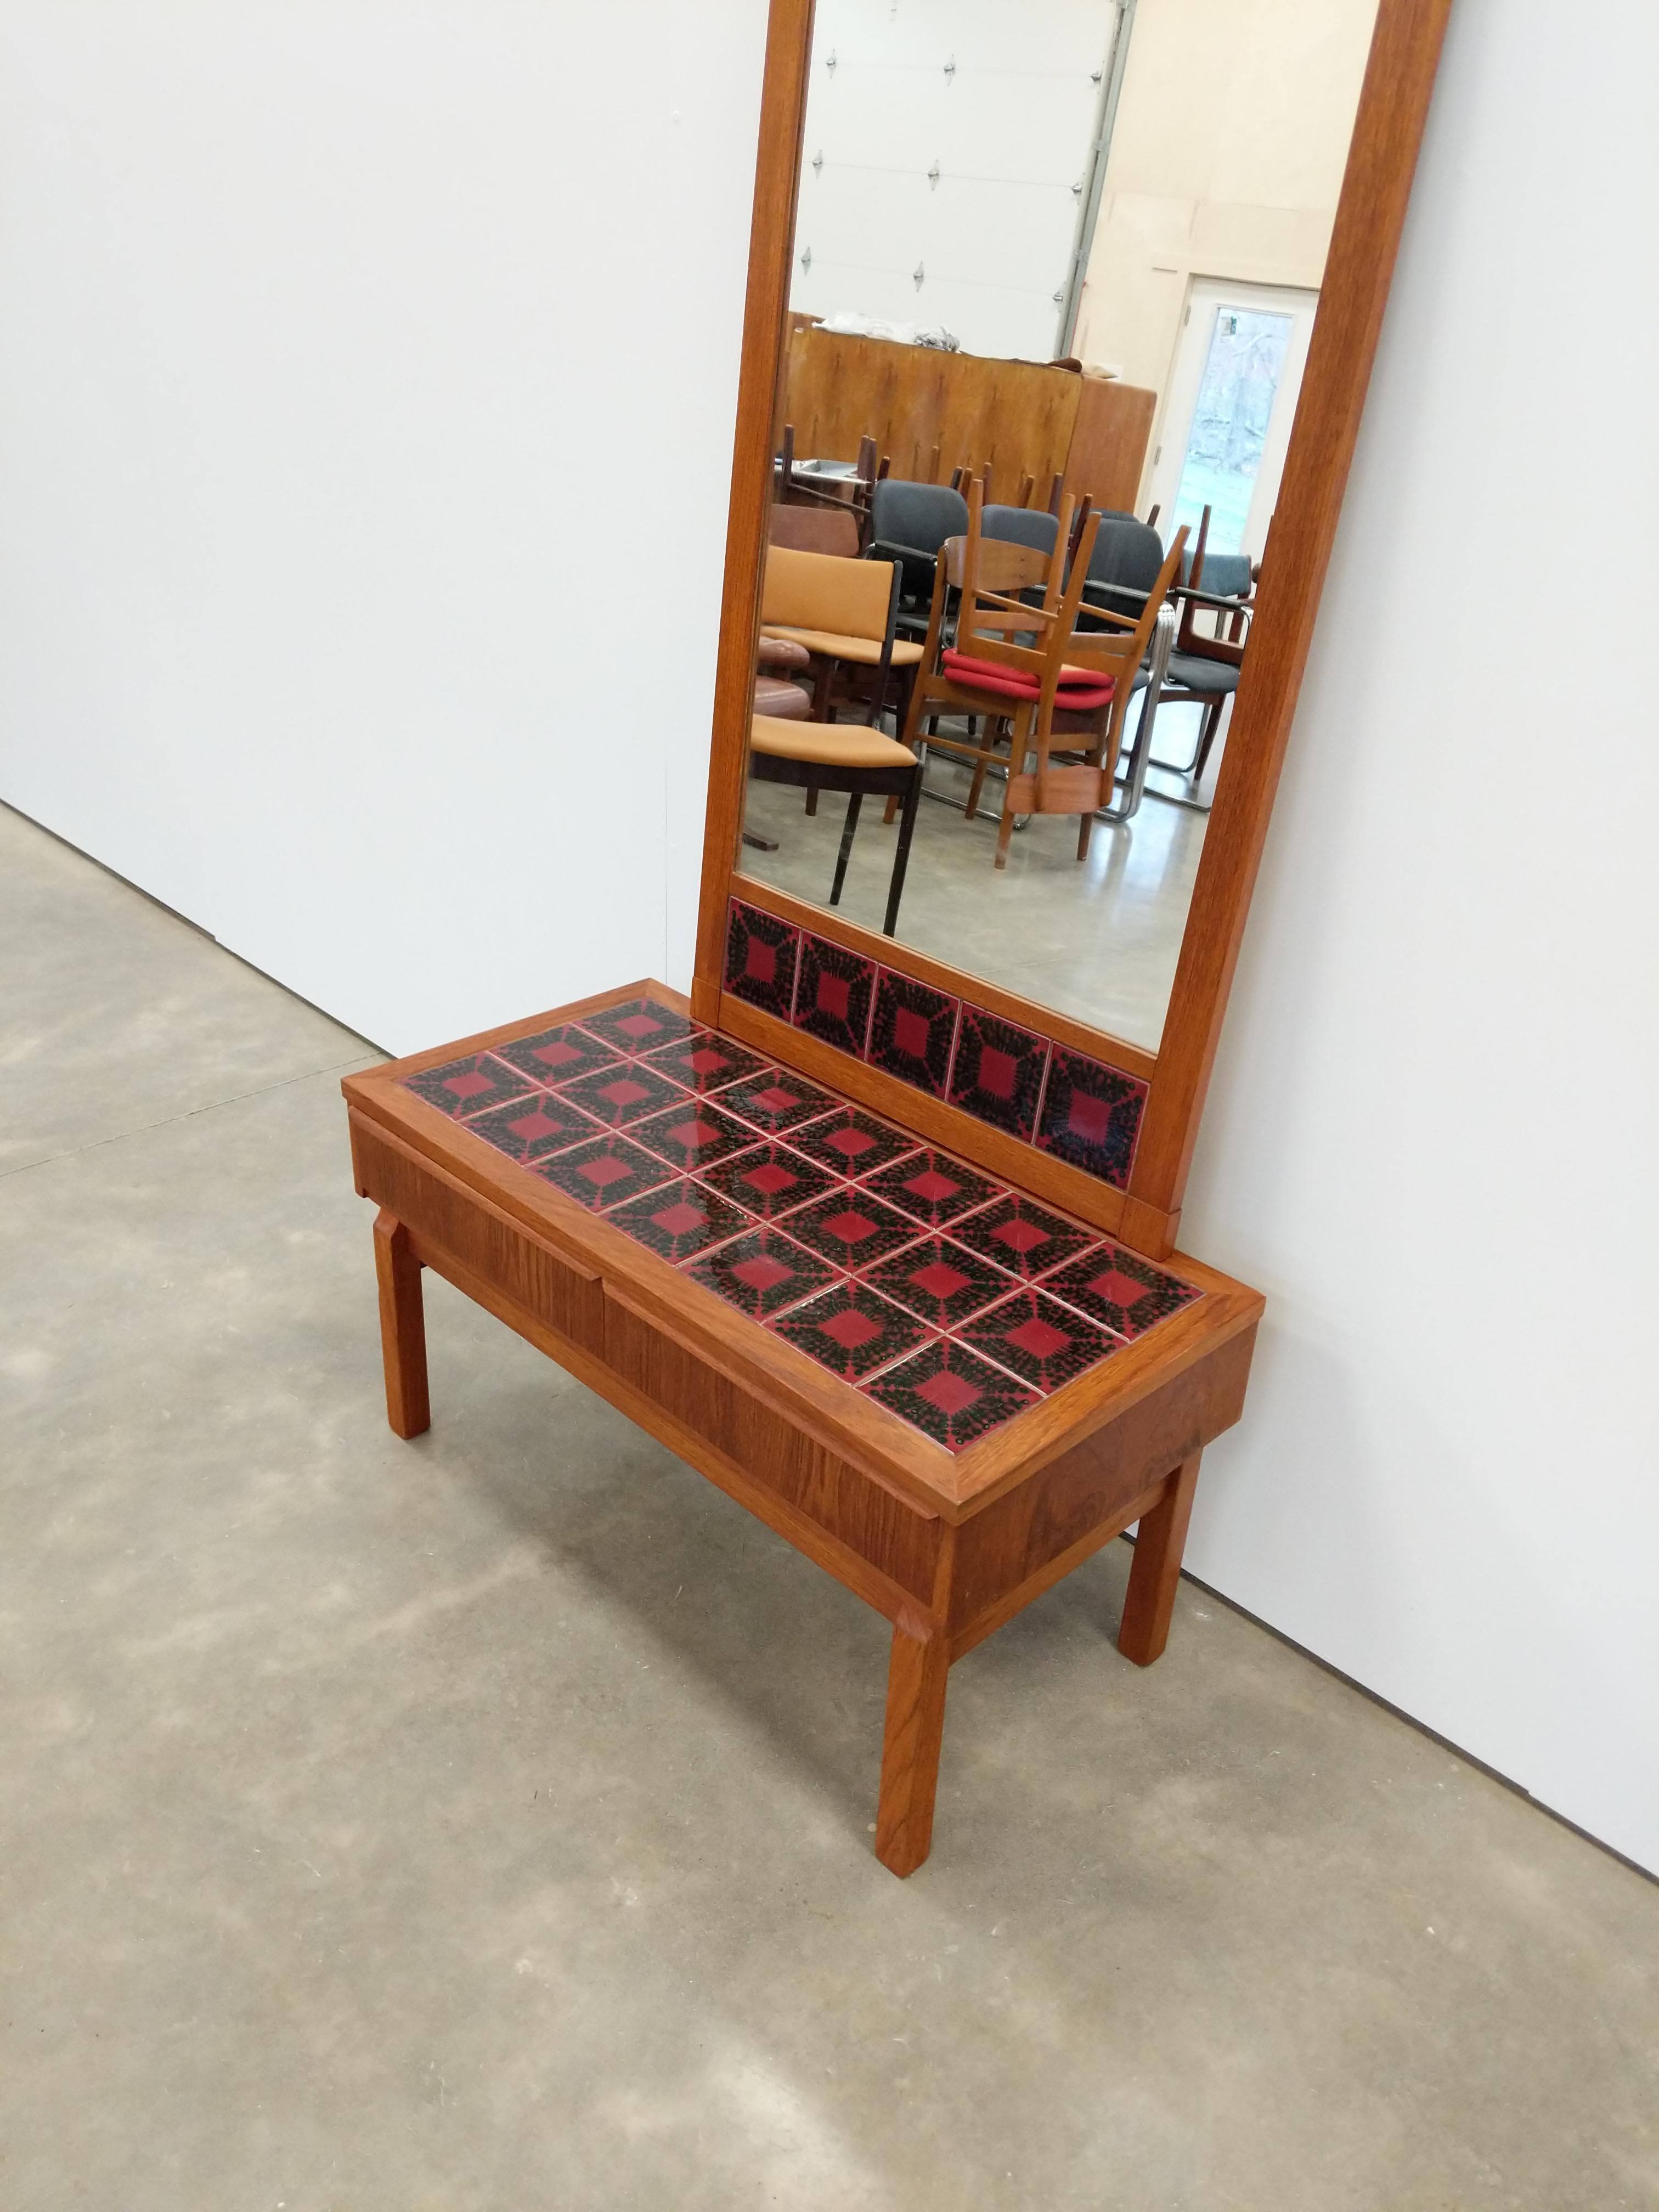 Authentic vintage mid century Danish / Scandinavian Modern teak entry set.

Low chest and mirror with tile.

Mirror hangs on the wall. Mirror is not hung the photos but has hanging hardware on the back.

This set is in excellent refinished condition